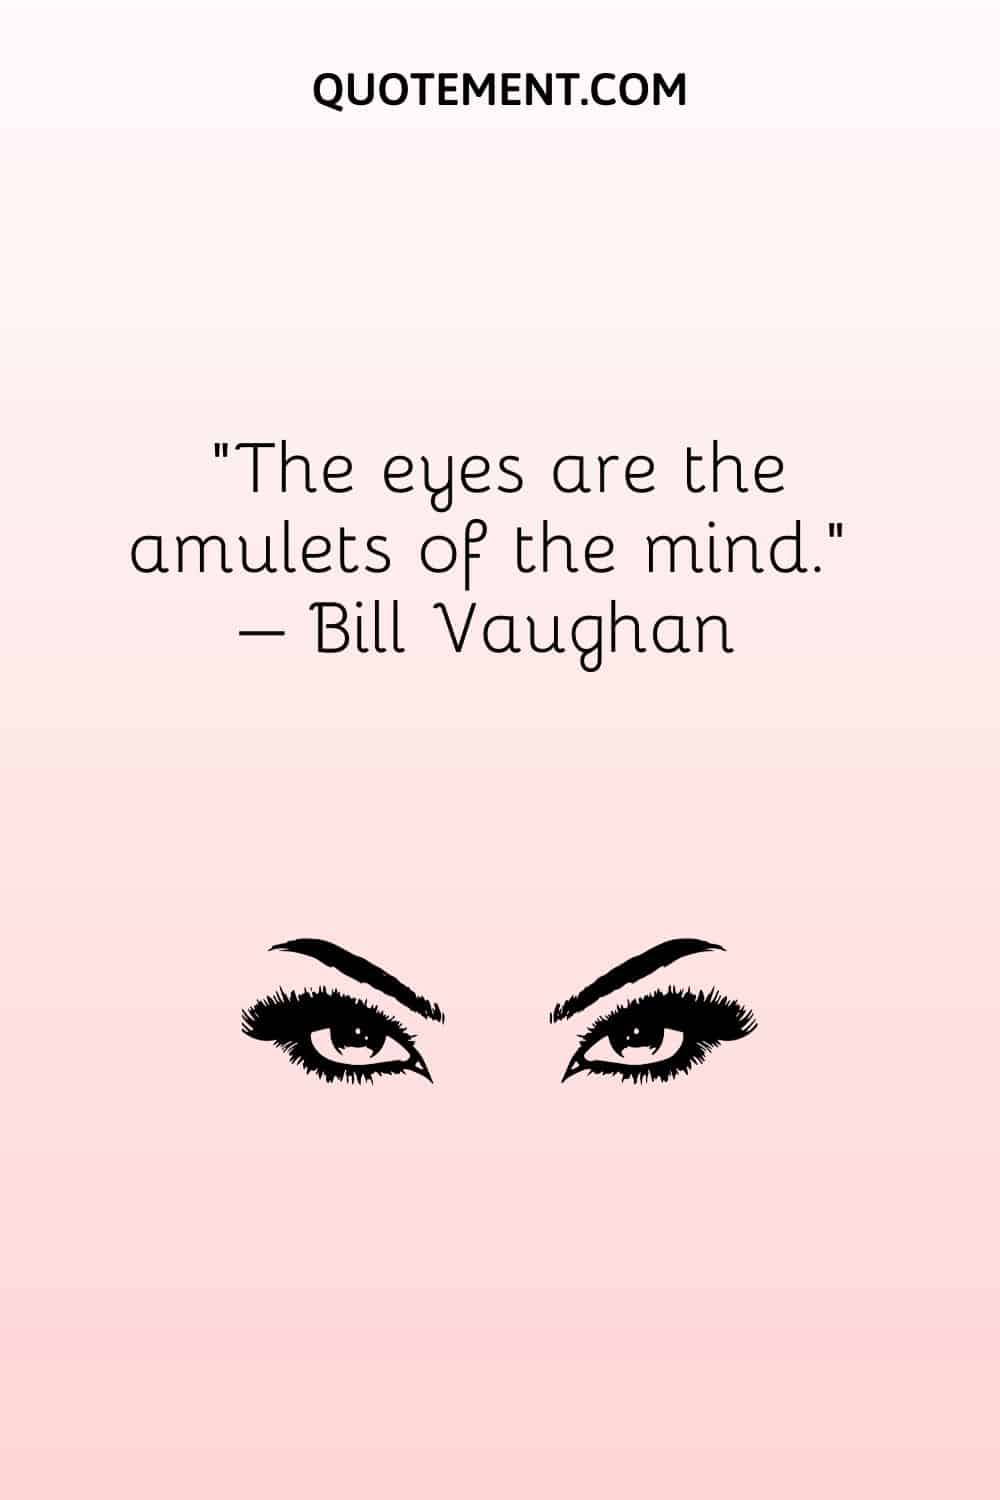 The eyes are the amulets of the mind.